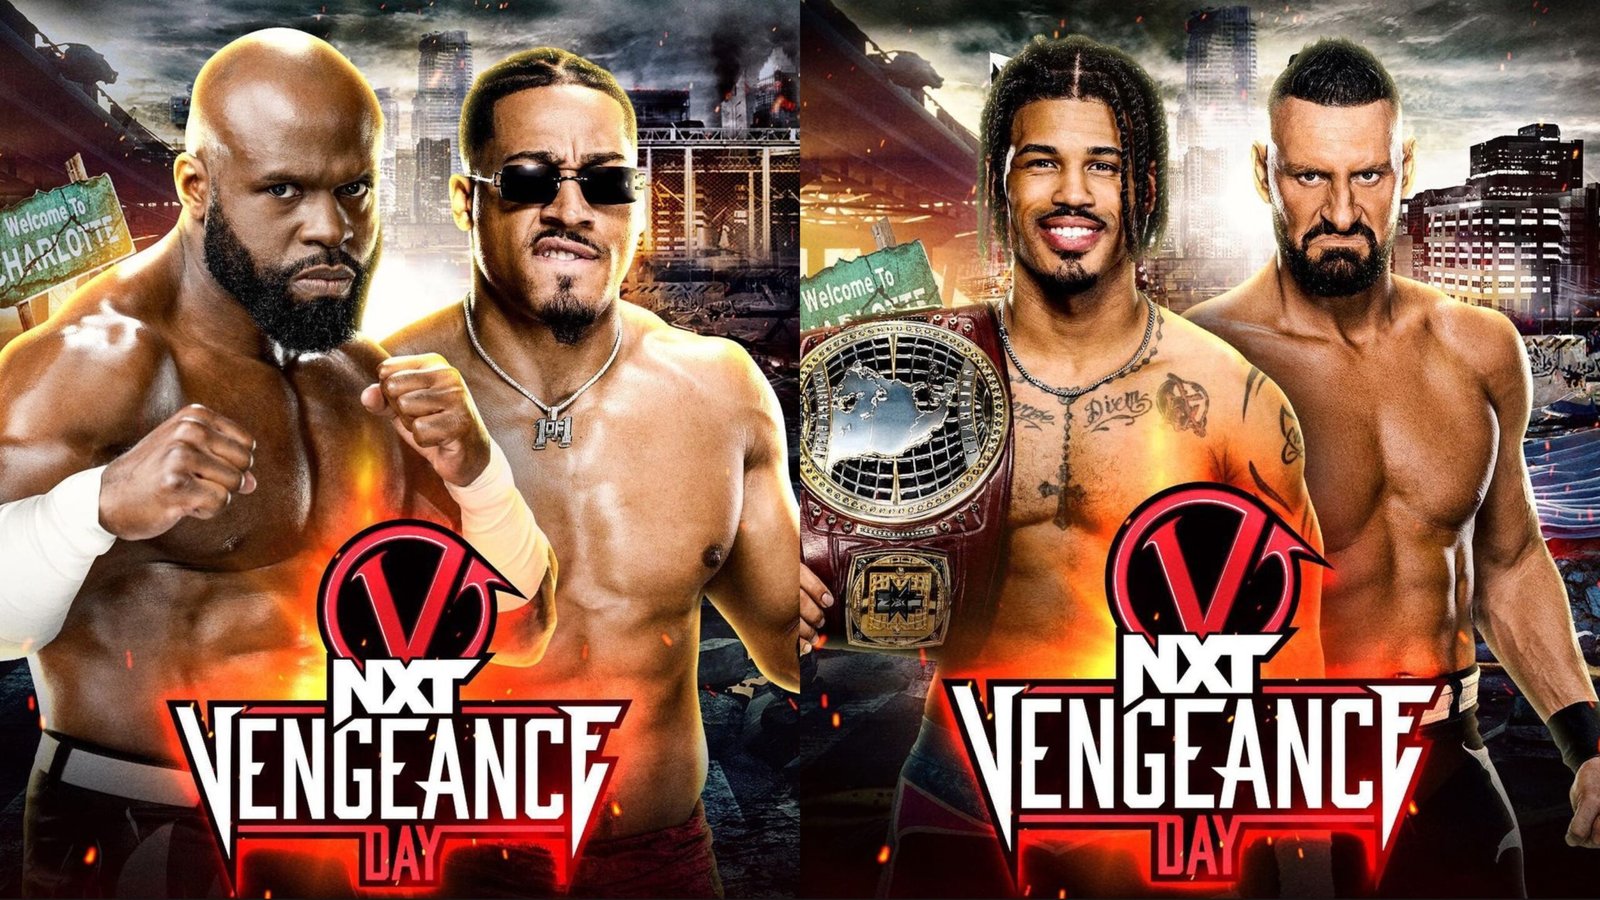 WWE NXT Vengeance Day 2023 Match Card Full List Of Matches Announced